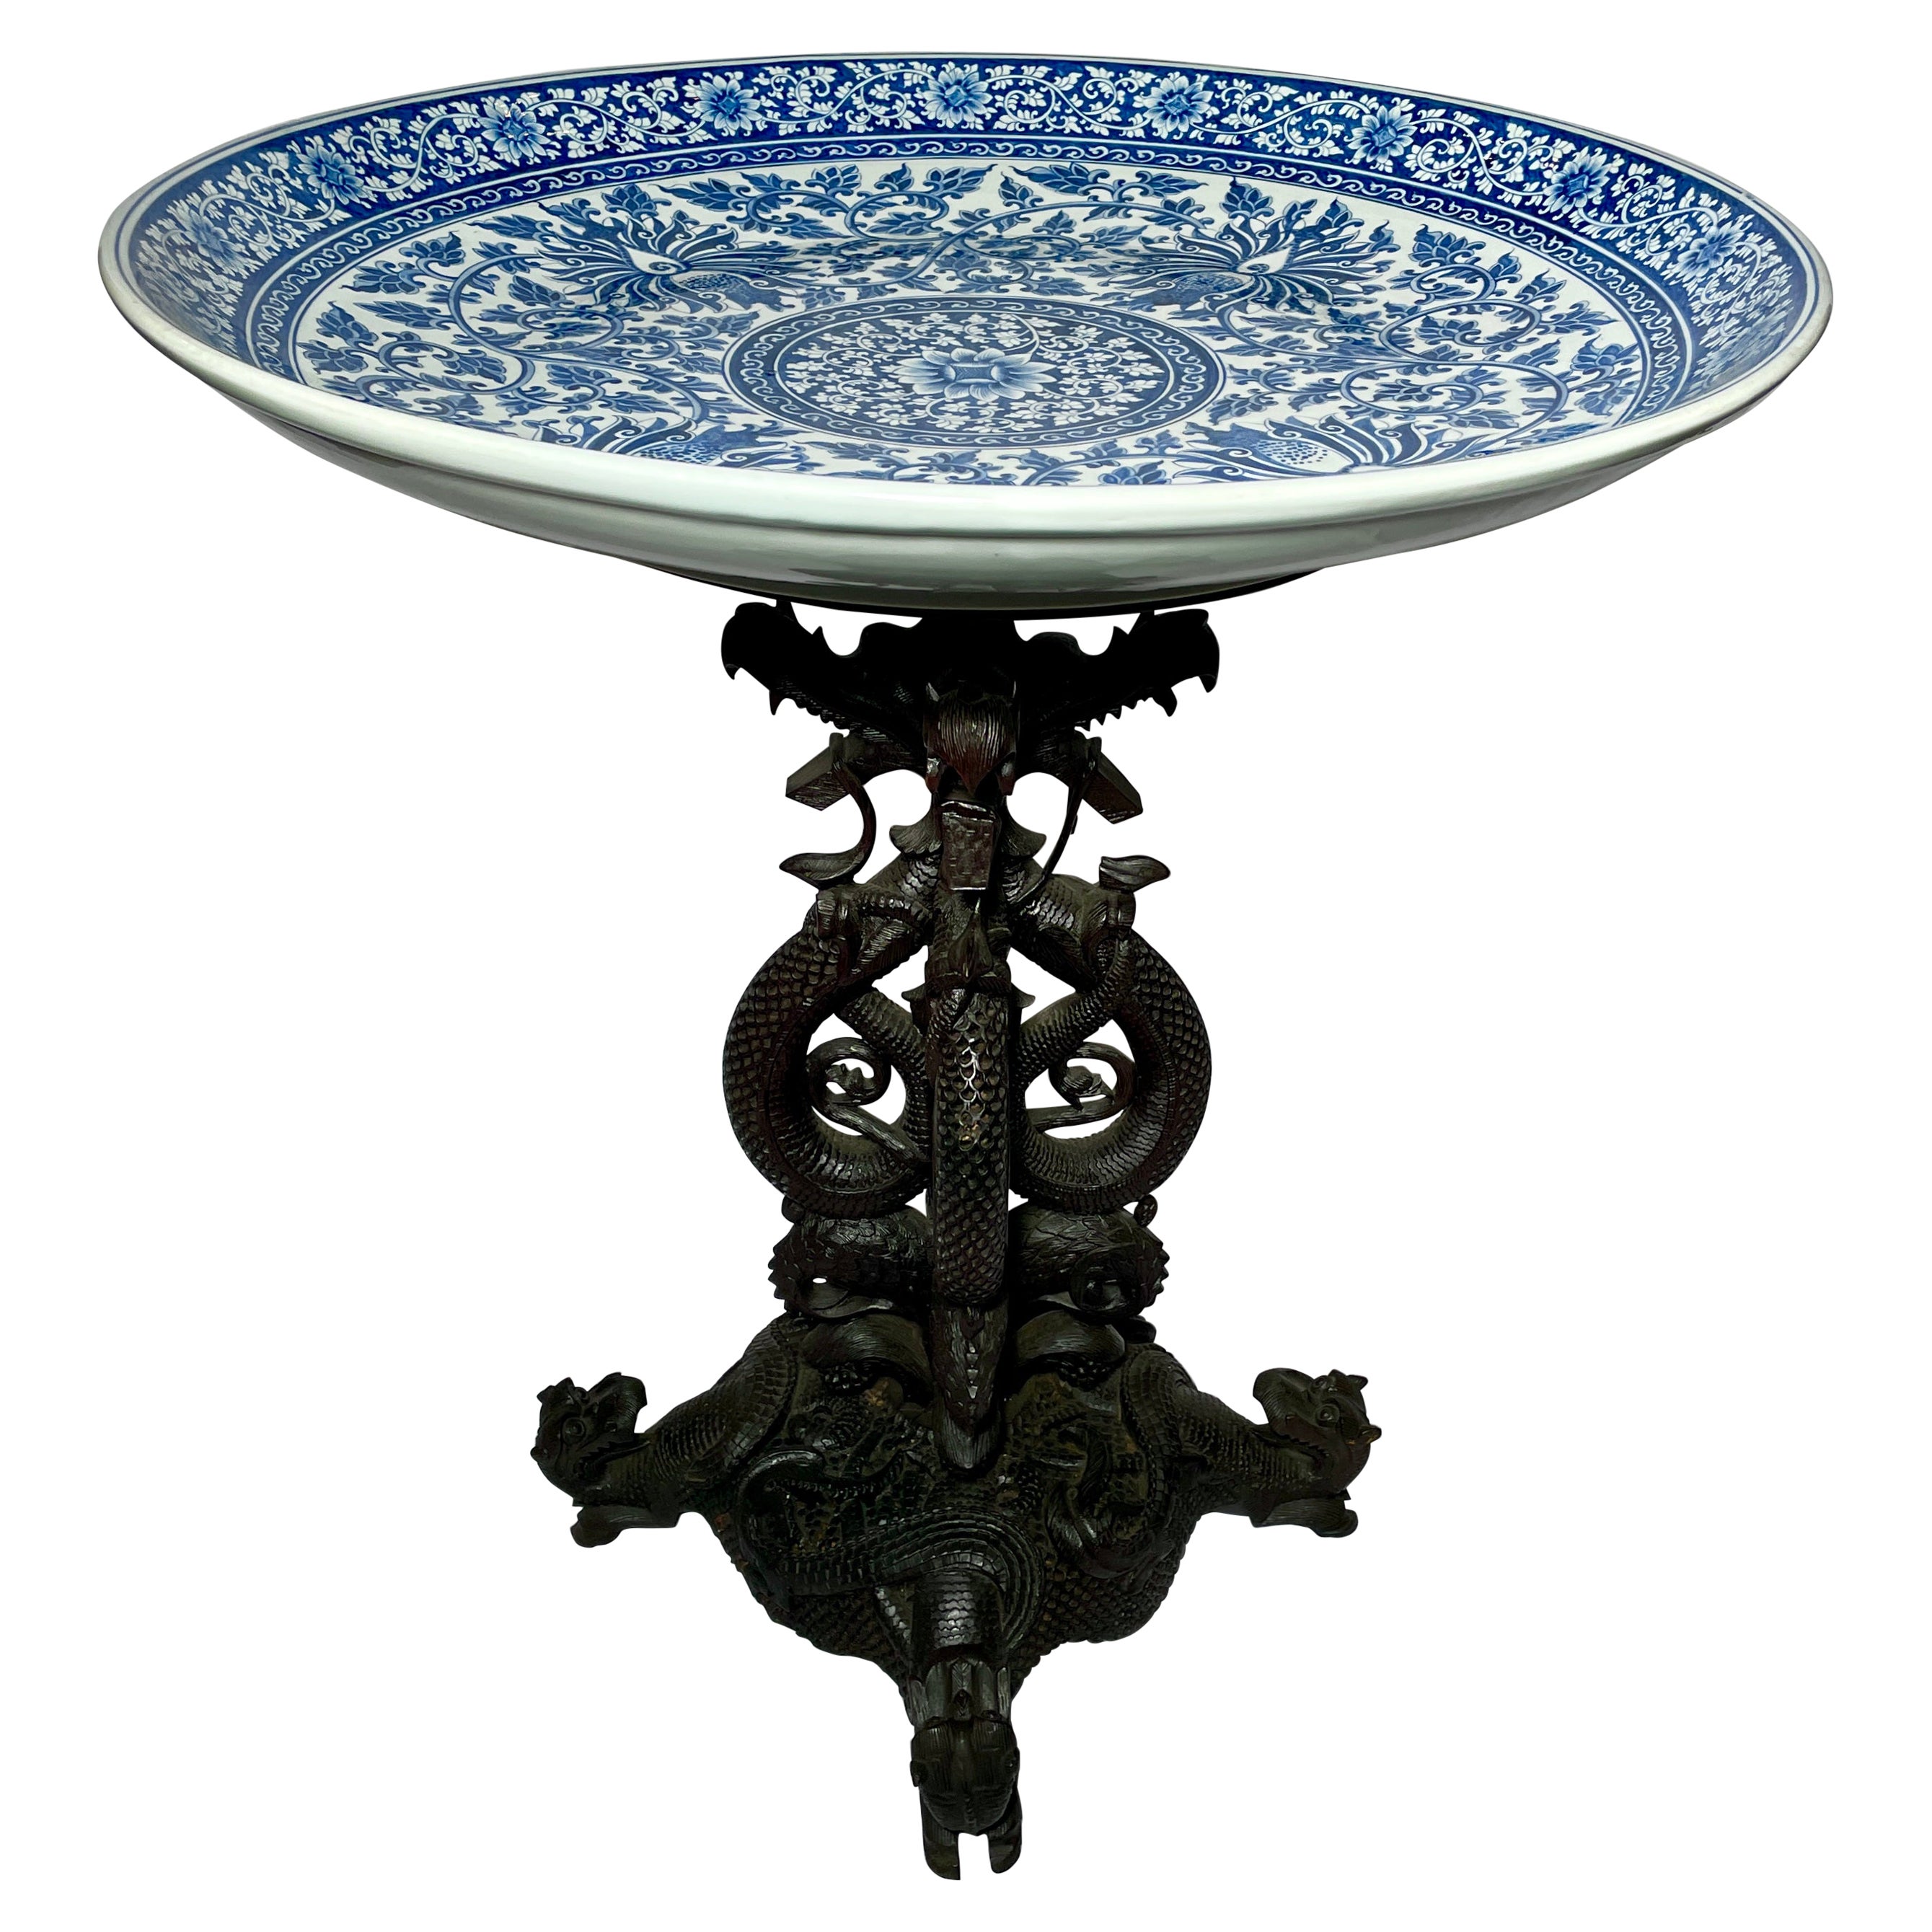 Antique Asian Blue & White Porcelain and Carved Hardwood Table, circa 1900s